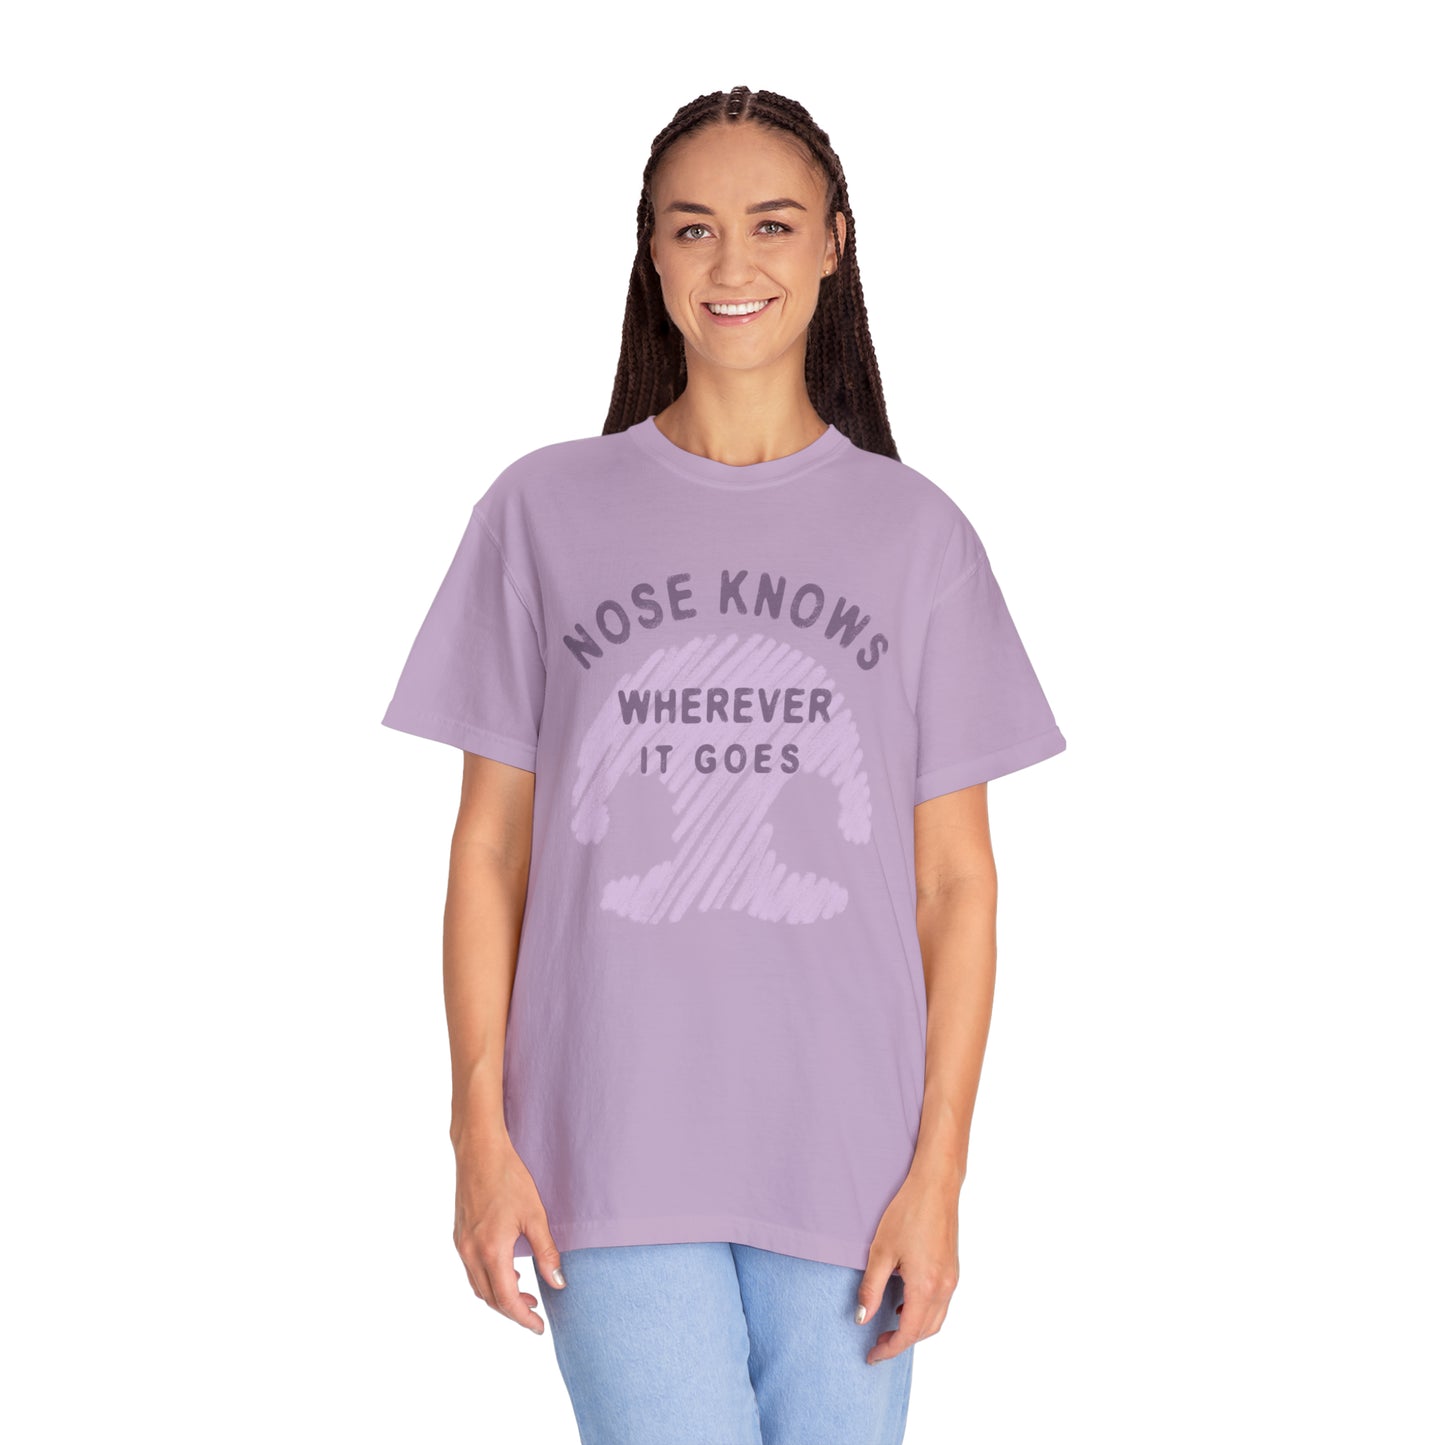 Unisex "NOSE KNOWS" T-shirt Orchid